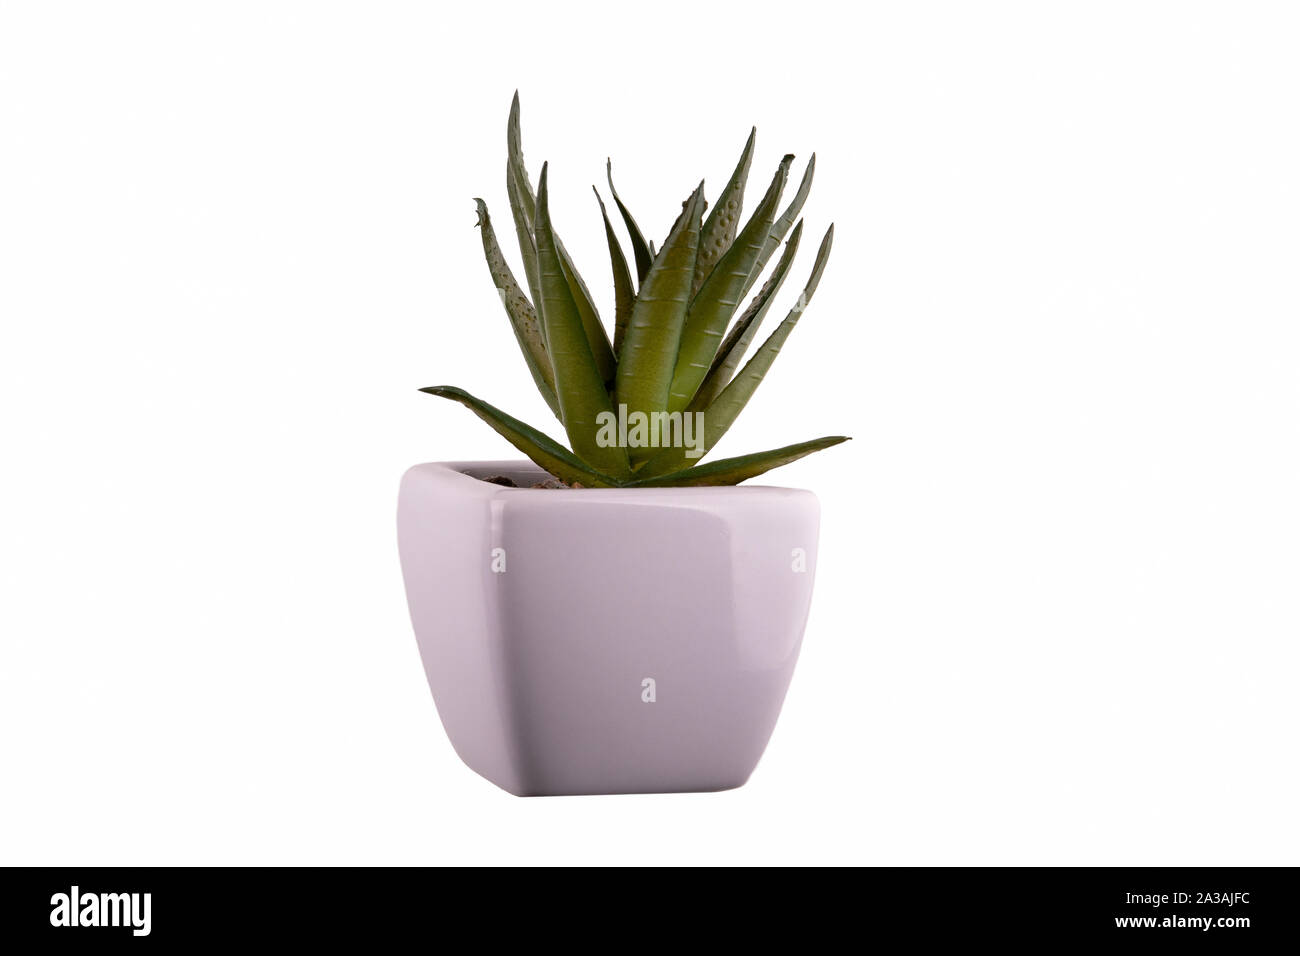 Decoration plant in a pot on white background Stock Photo - Alamy